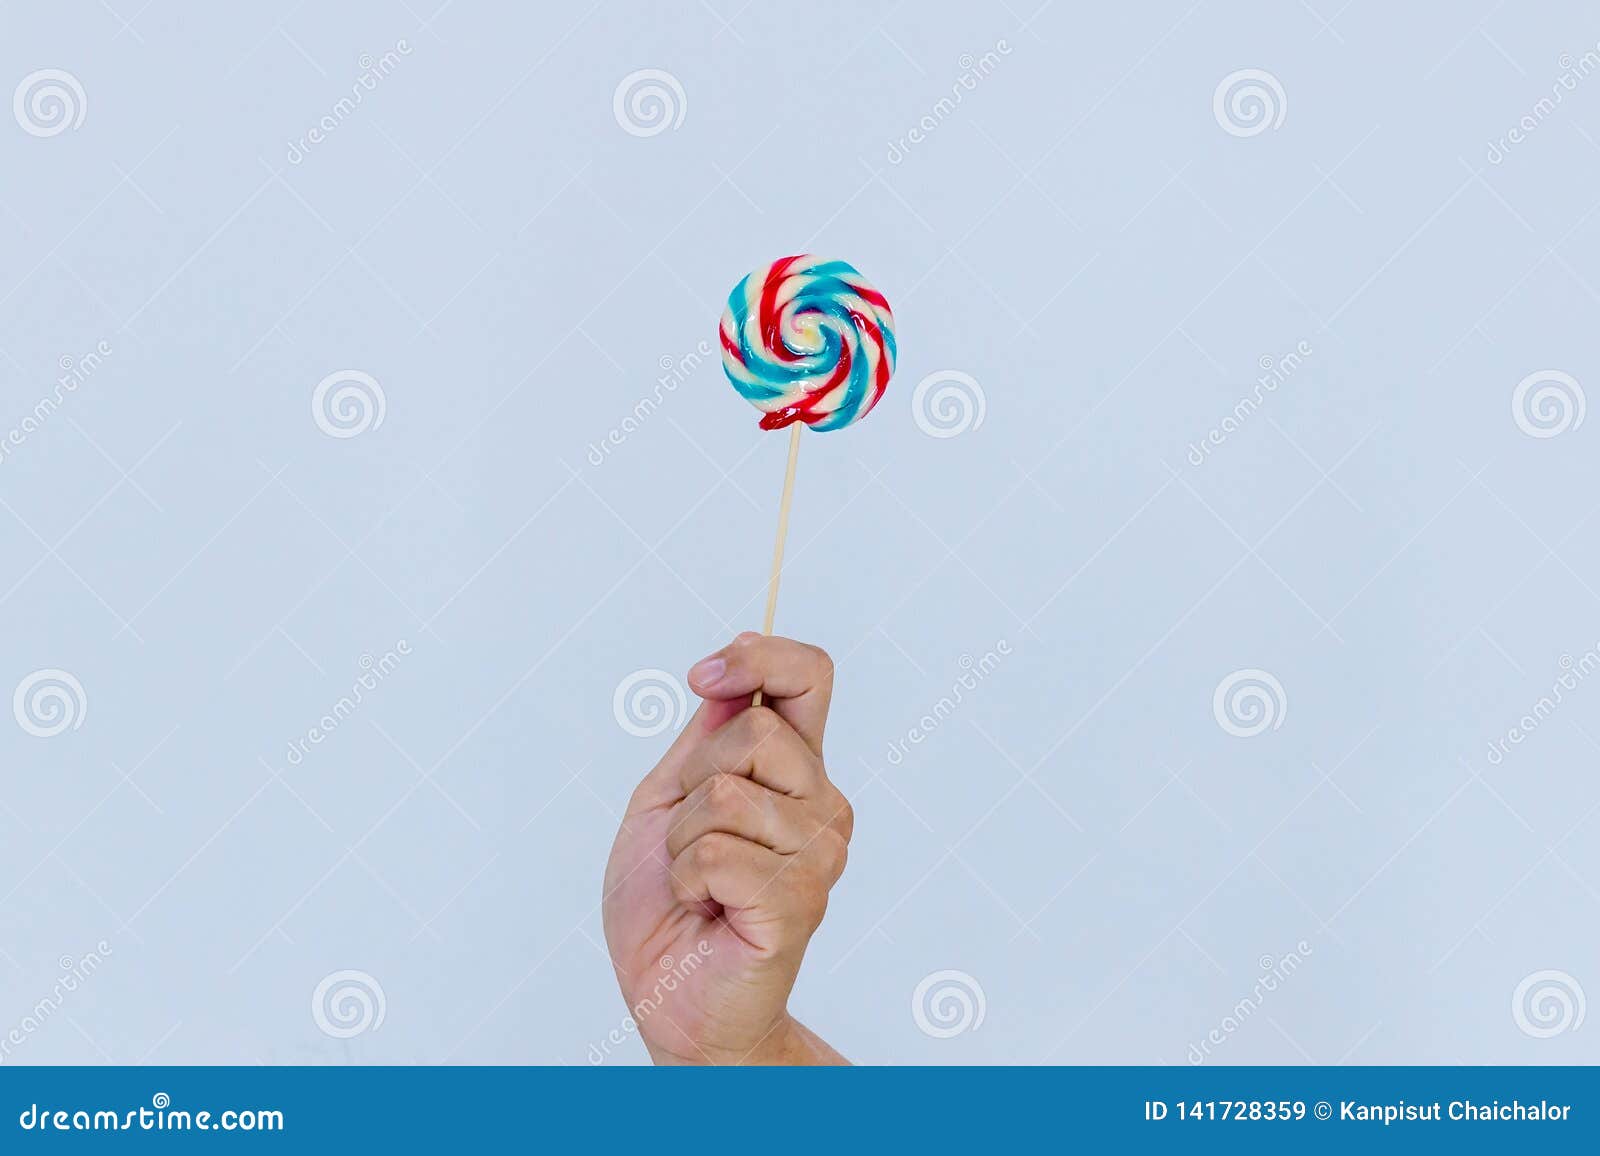 Fun And Celebration Concept.hand Holding Big Colorful Lollipop Candy On ...